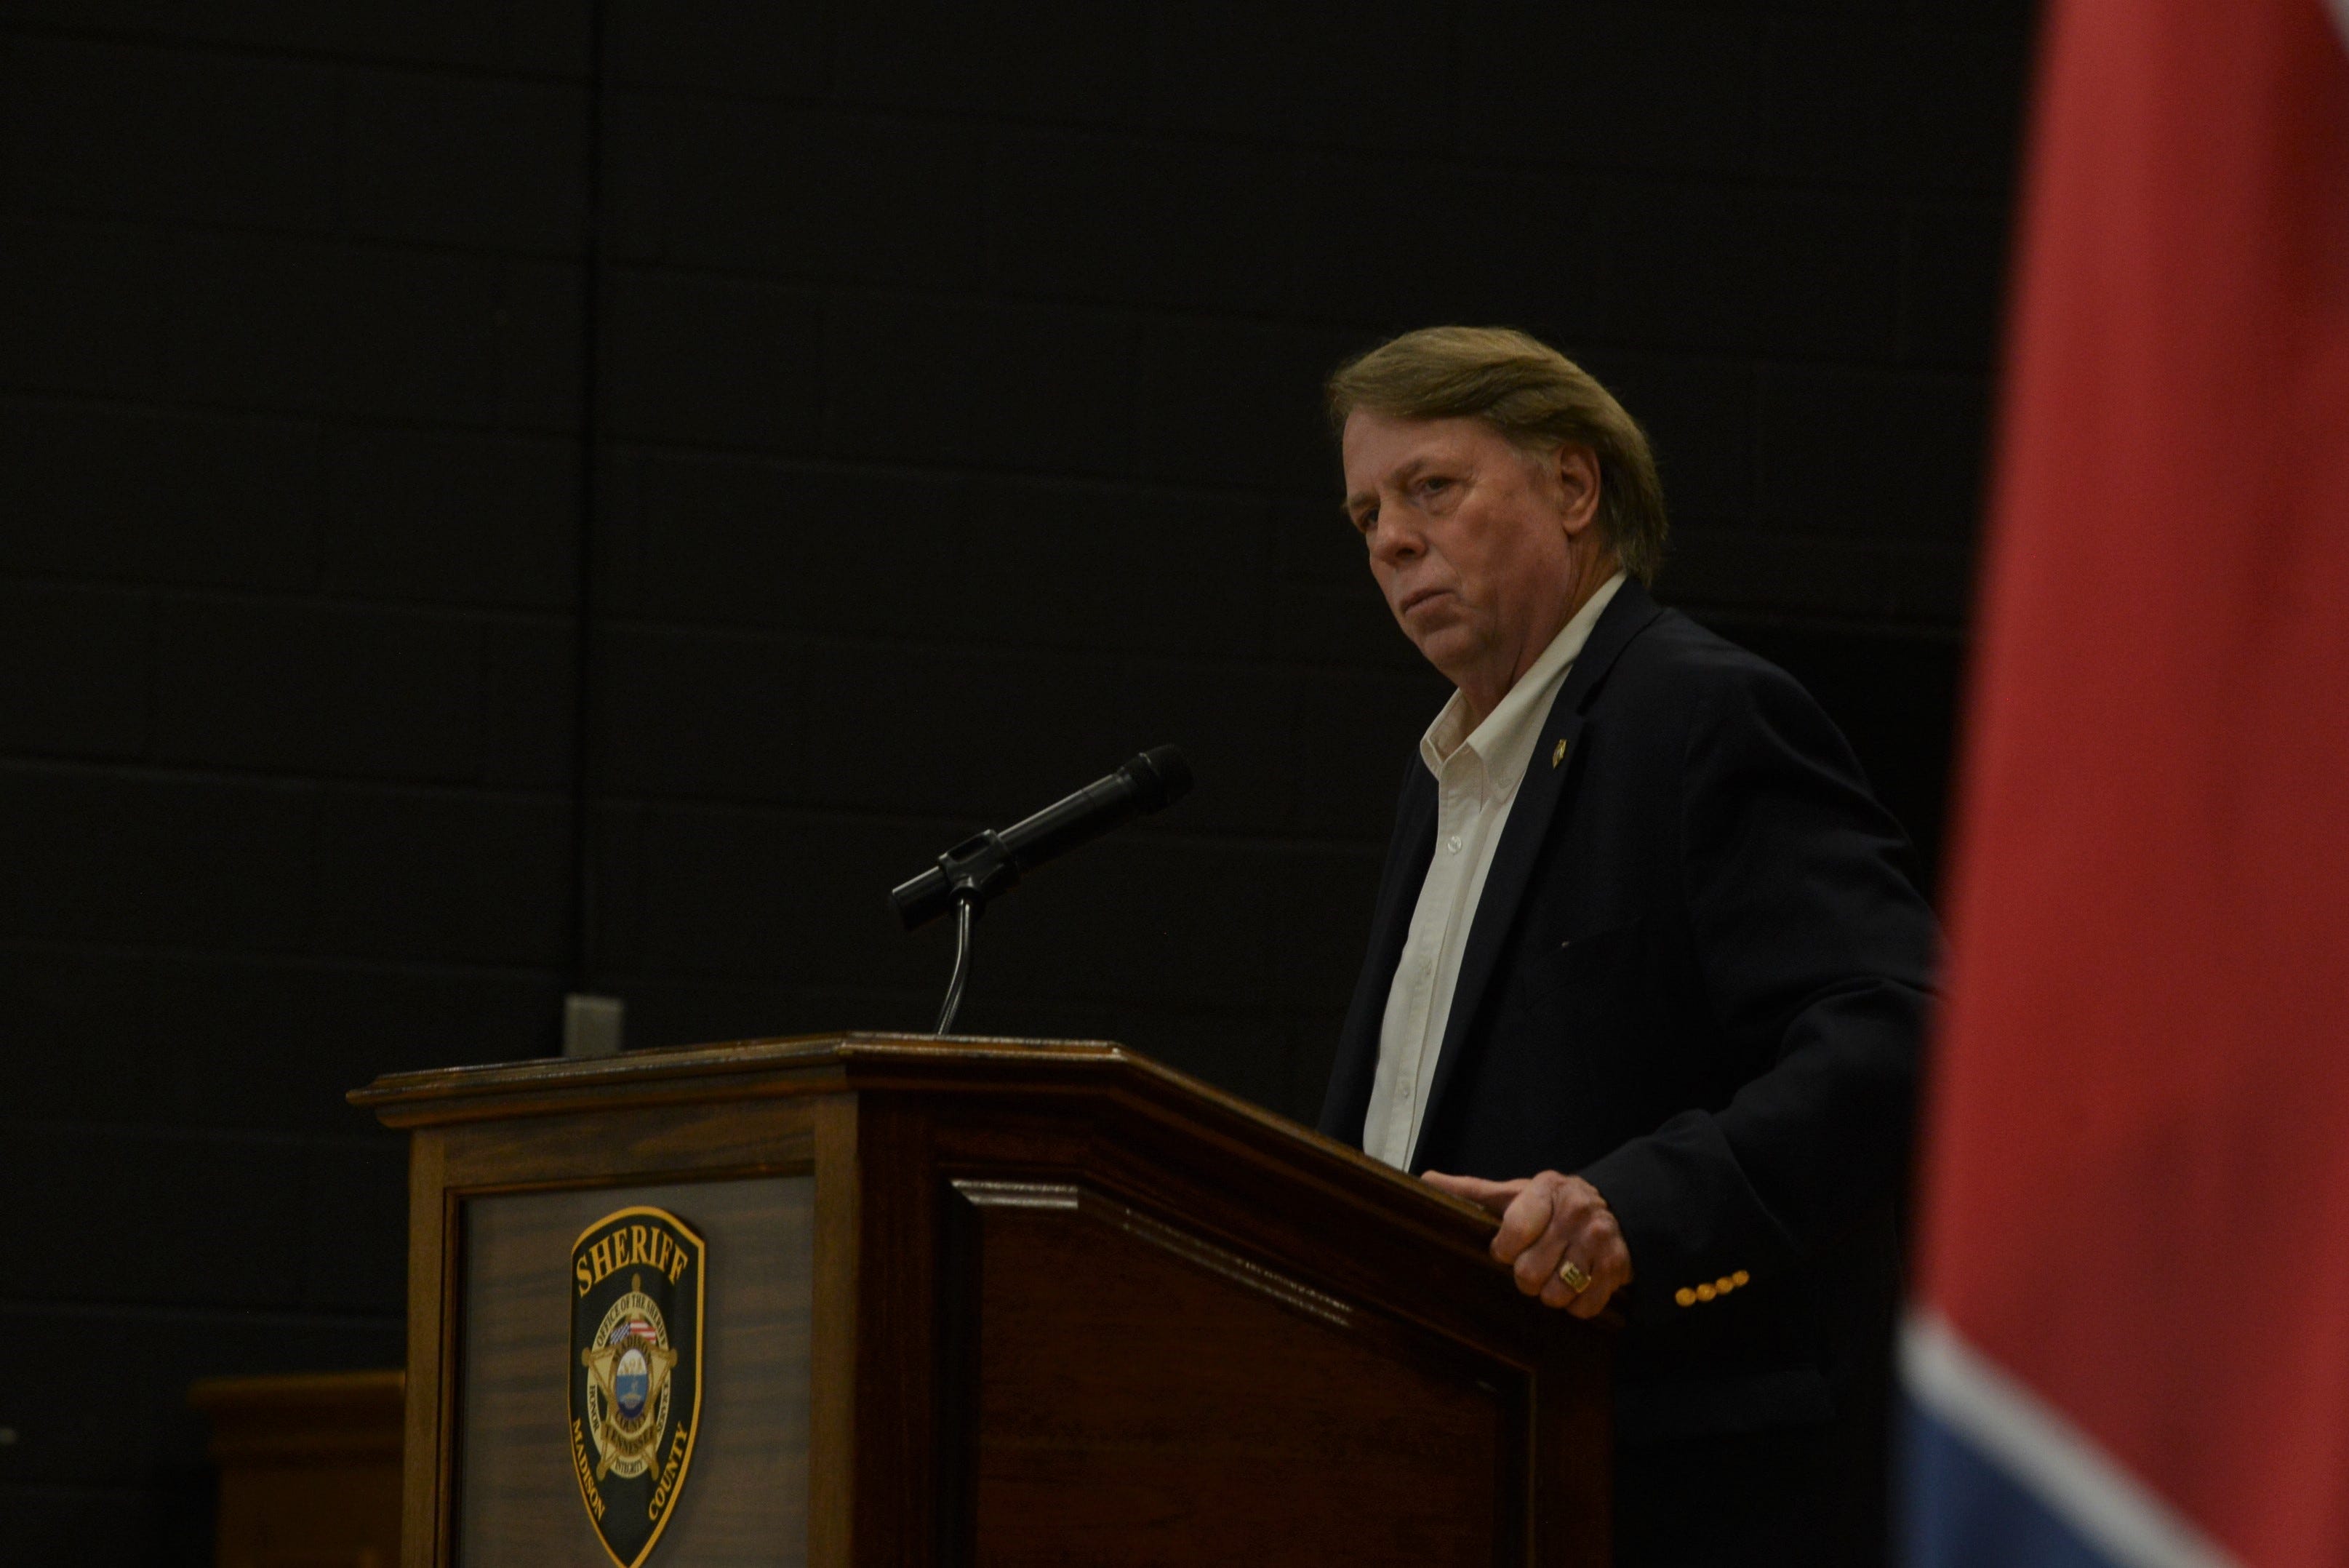 Madison County Sheriff John Mehr speaks at a Child Homicide Conference at the West Tennessee Regional Training Center in Denmark on May 15, 2019.